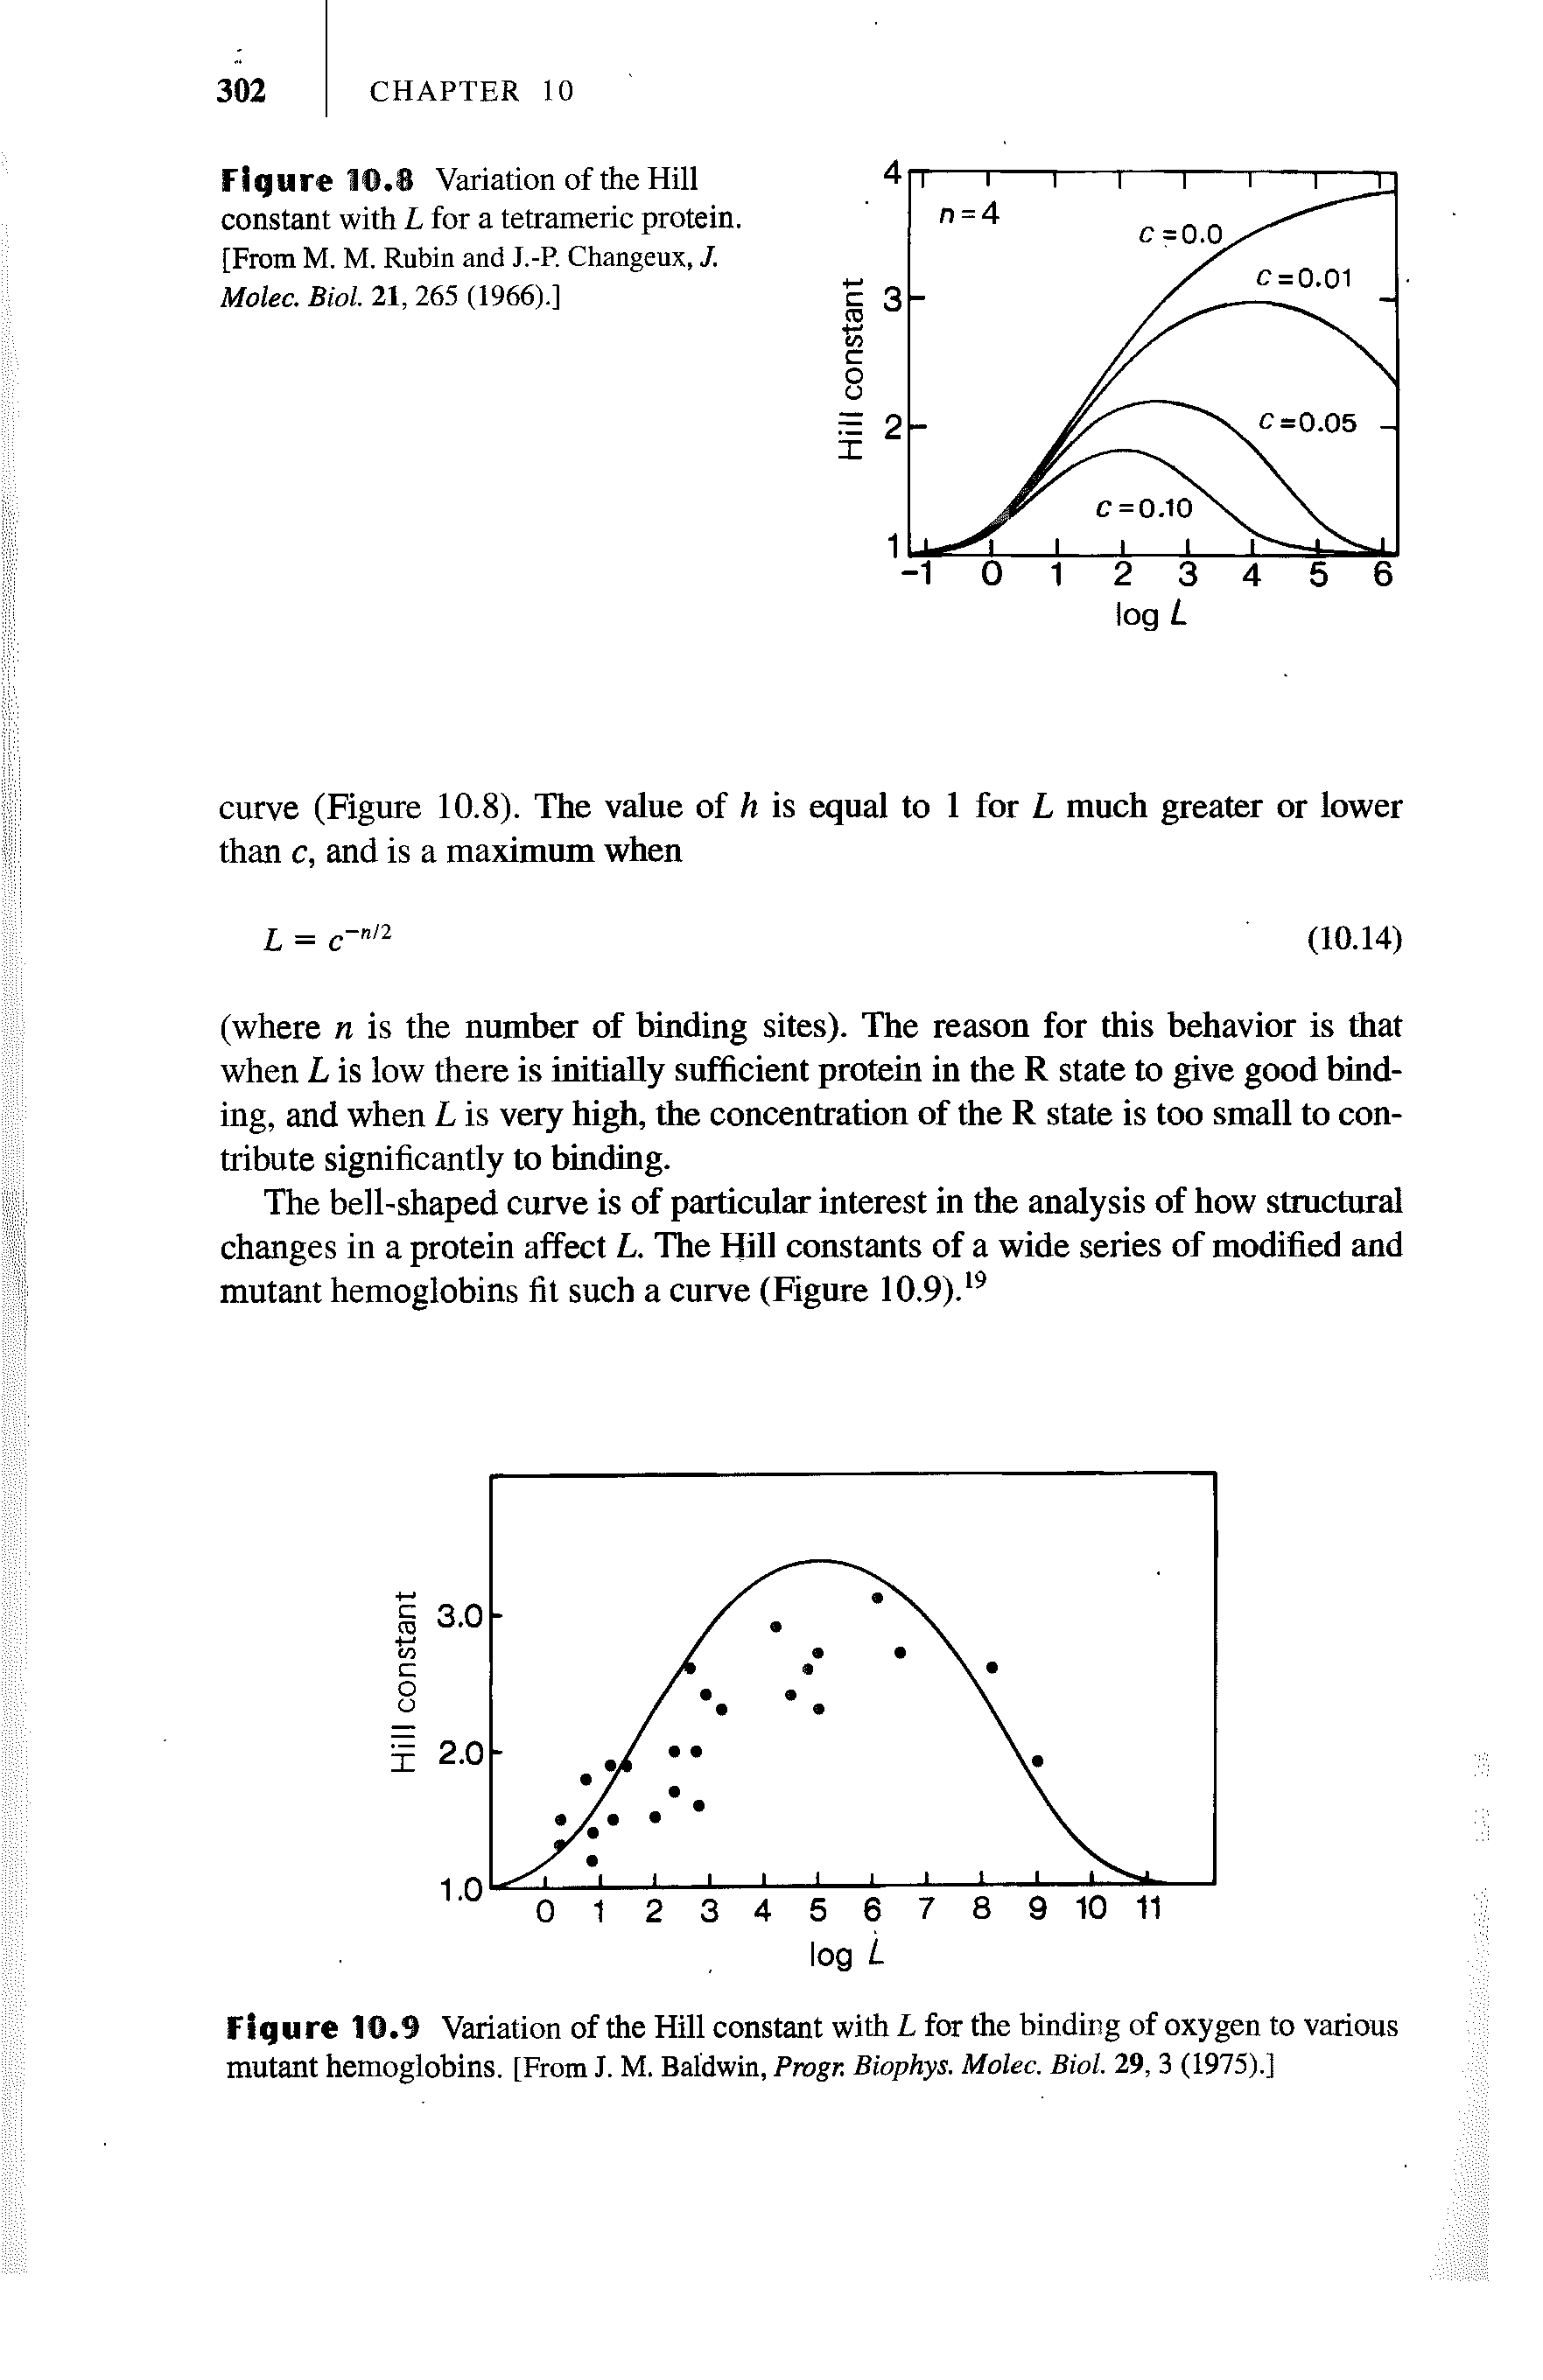 Figure 10.9 Variation of the Hill constant with L for the binding of oxygen to various mutant hemoglobins. [From I M. Baldwin, Progr. Biophys. Molec. Biol. 29, 3 (1975).]...